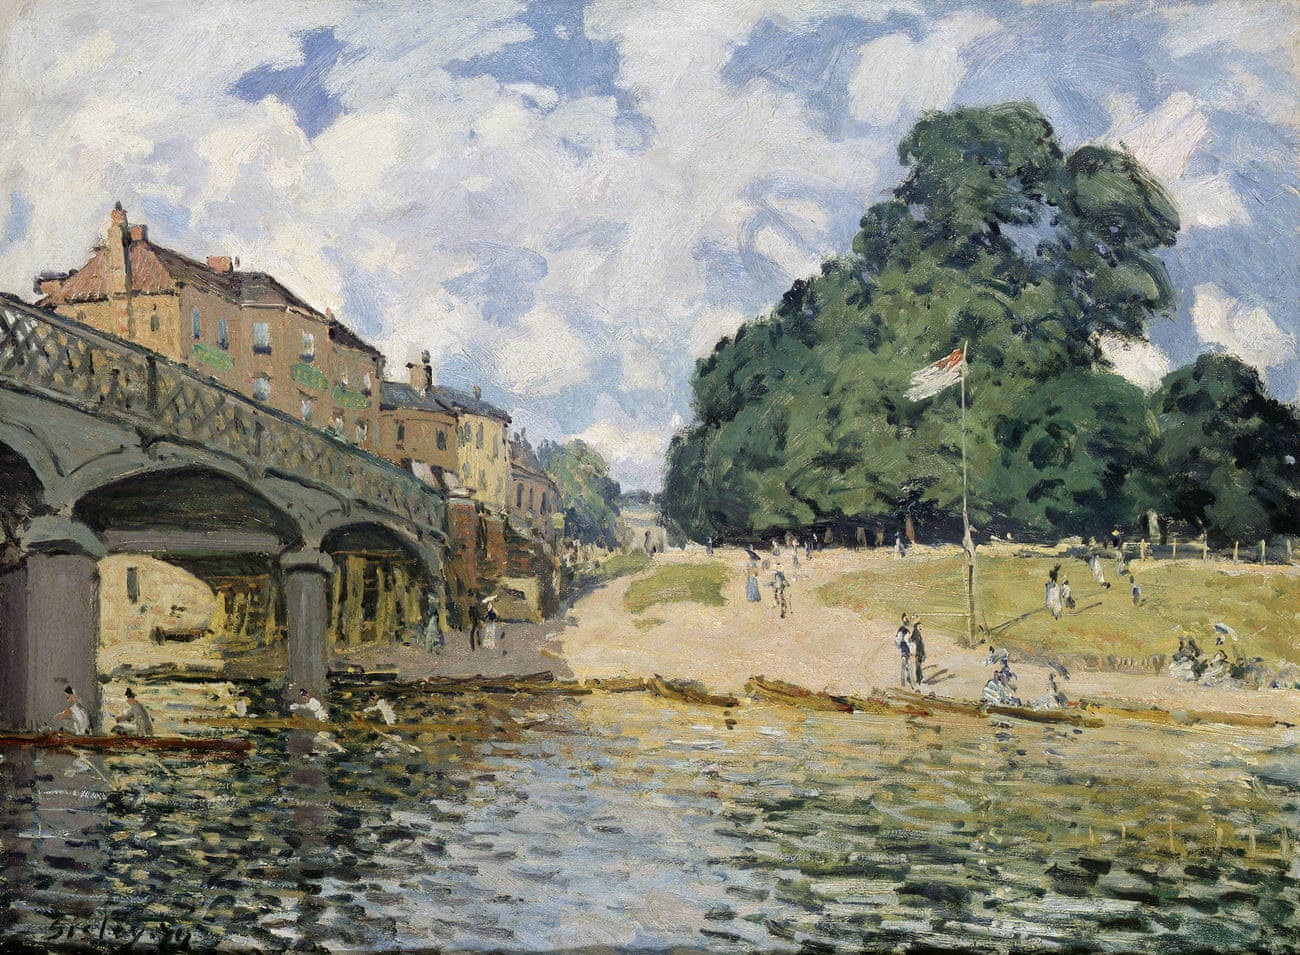 The Bridge at Hampton Court by Alfred Sisley (1874), which appears in Impressionists in London, French Artists in Exile (1870–1904).